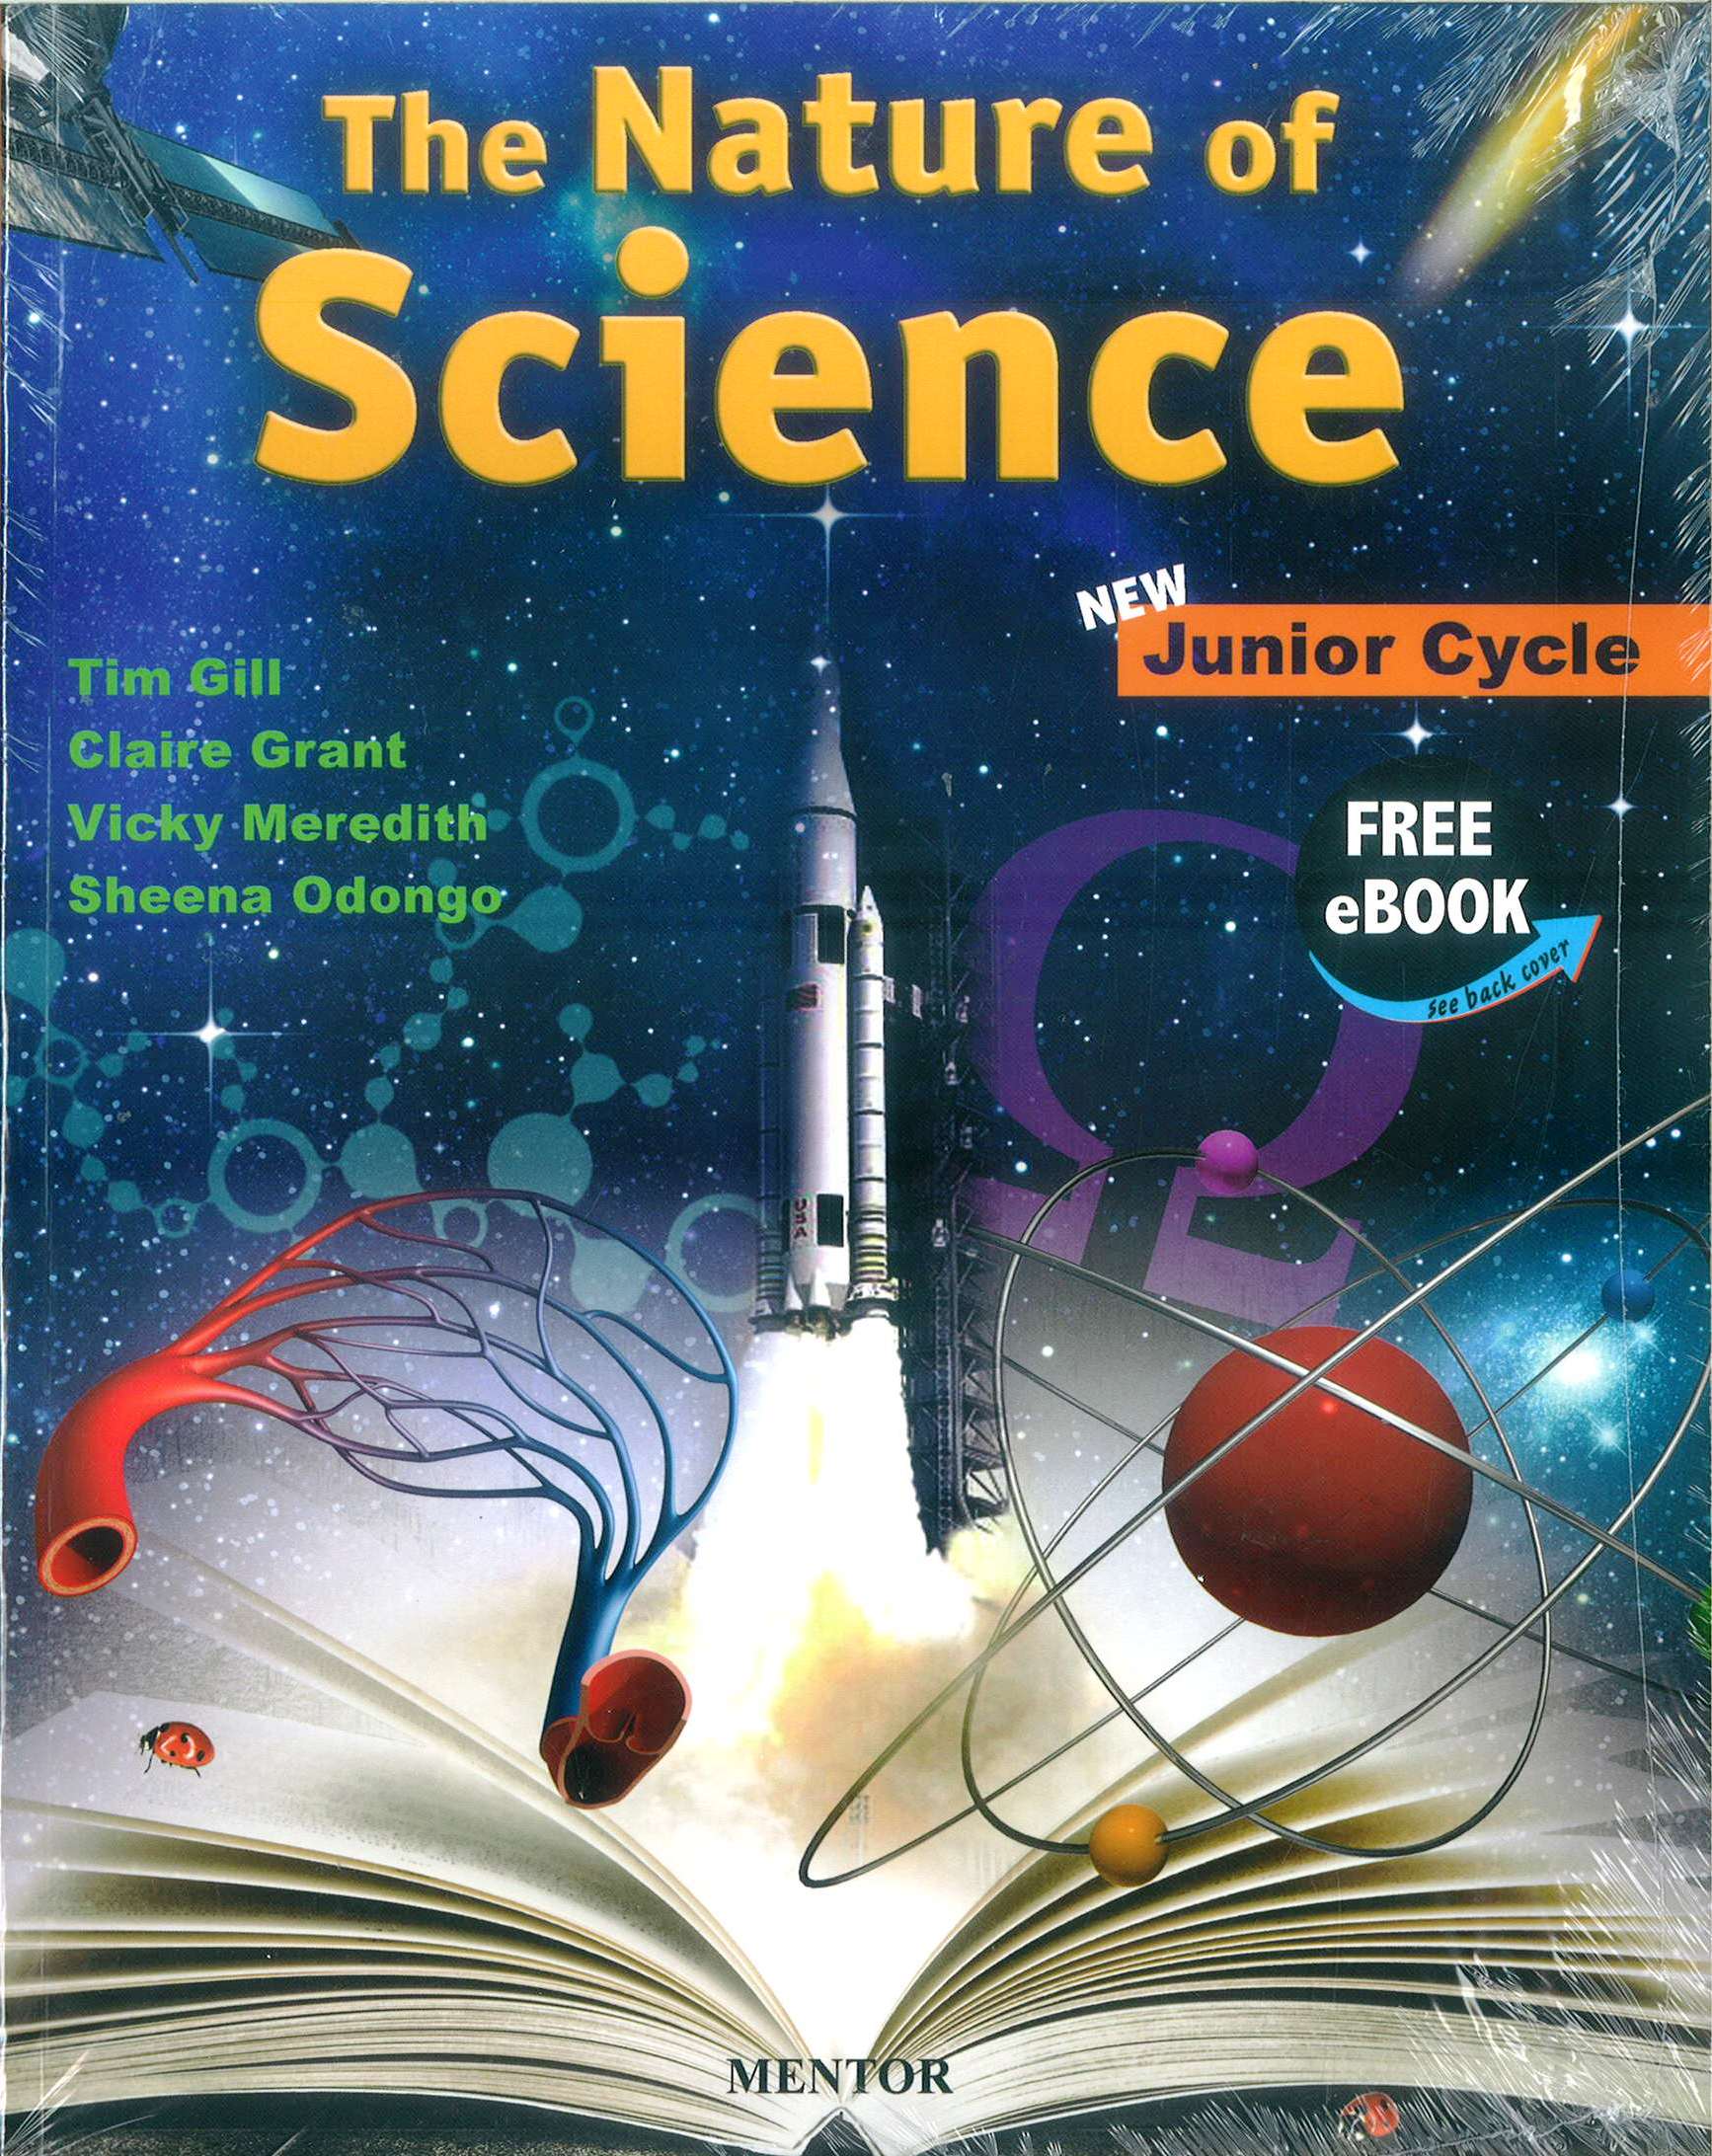 book review in science